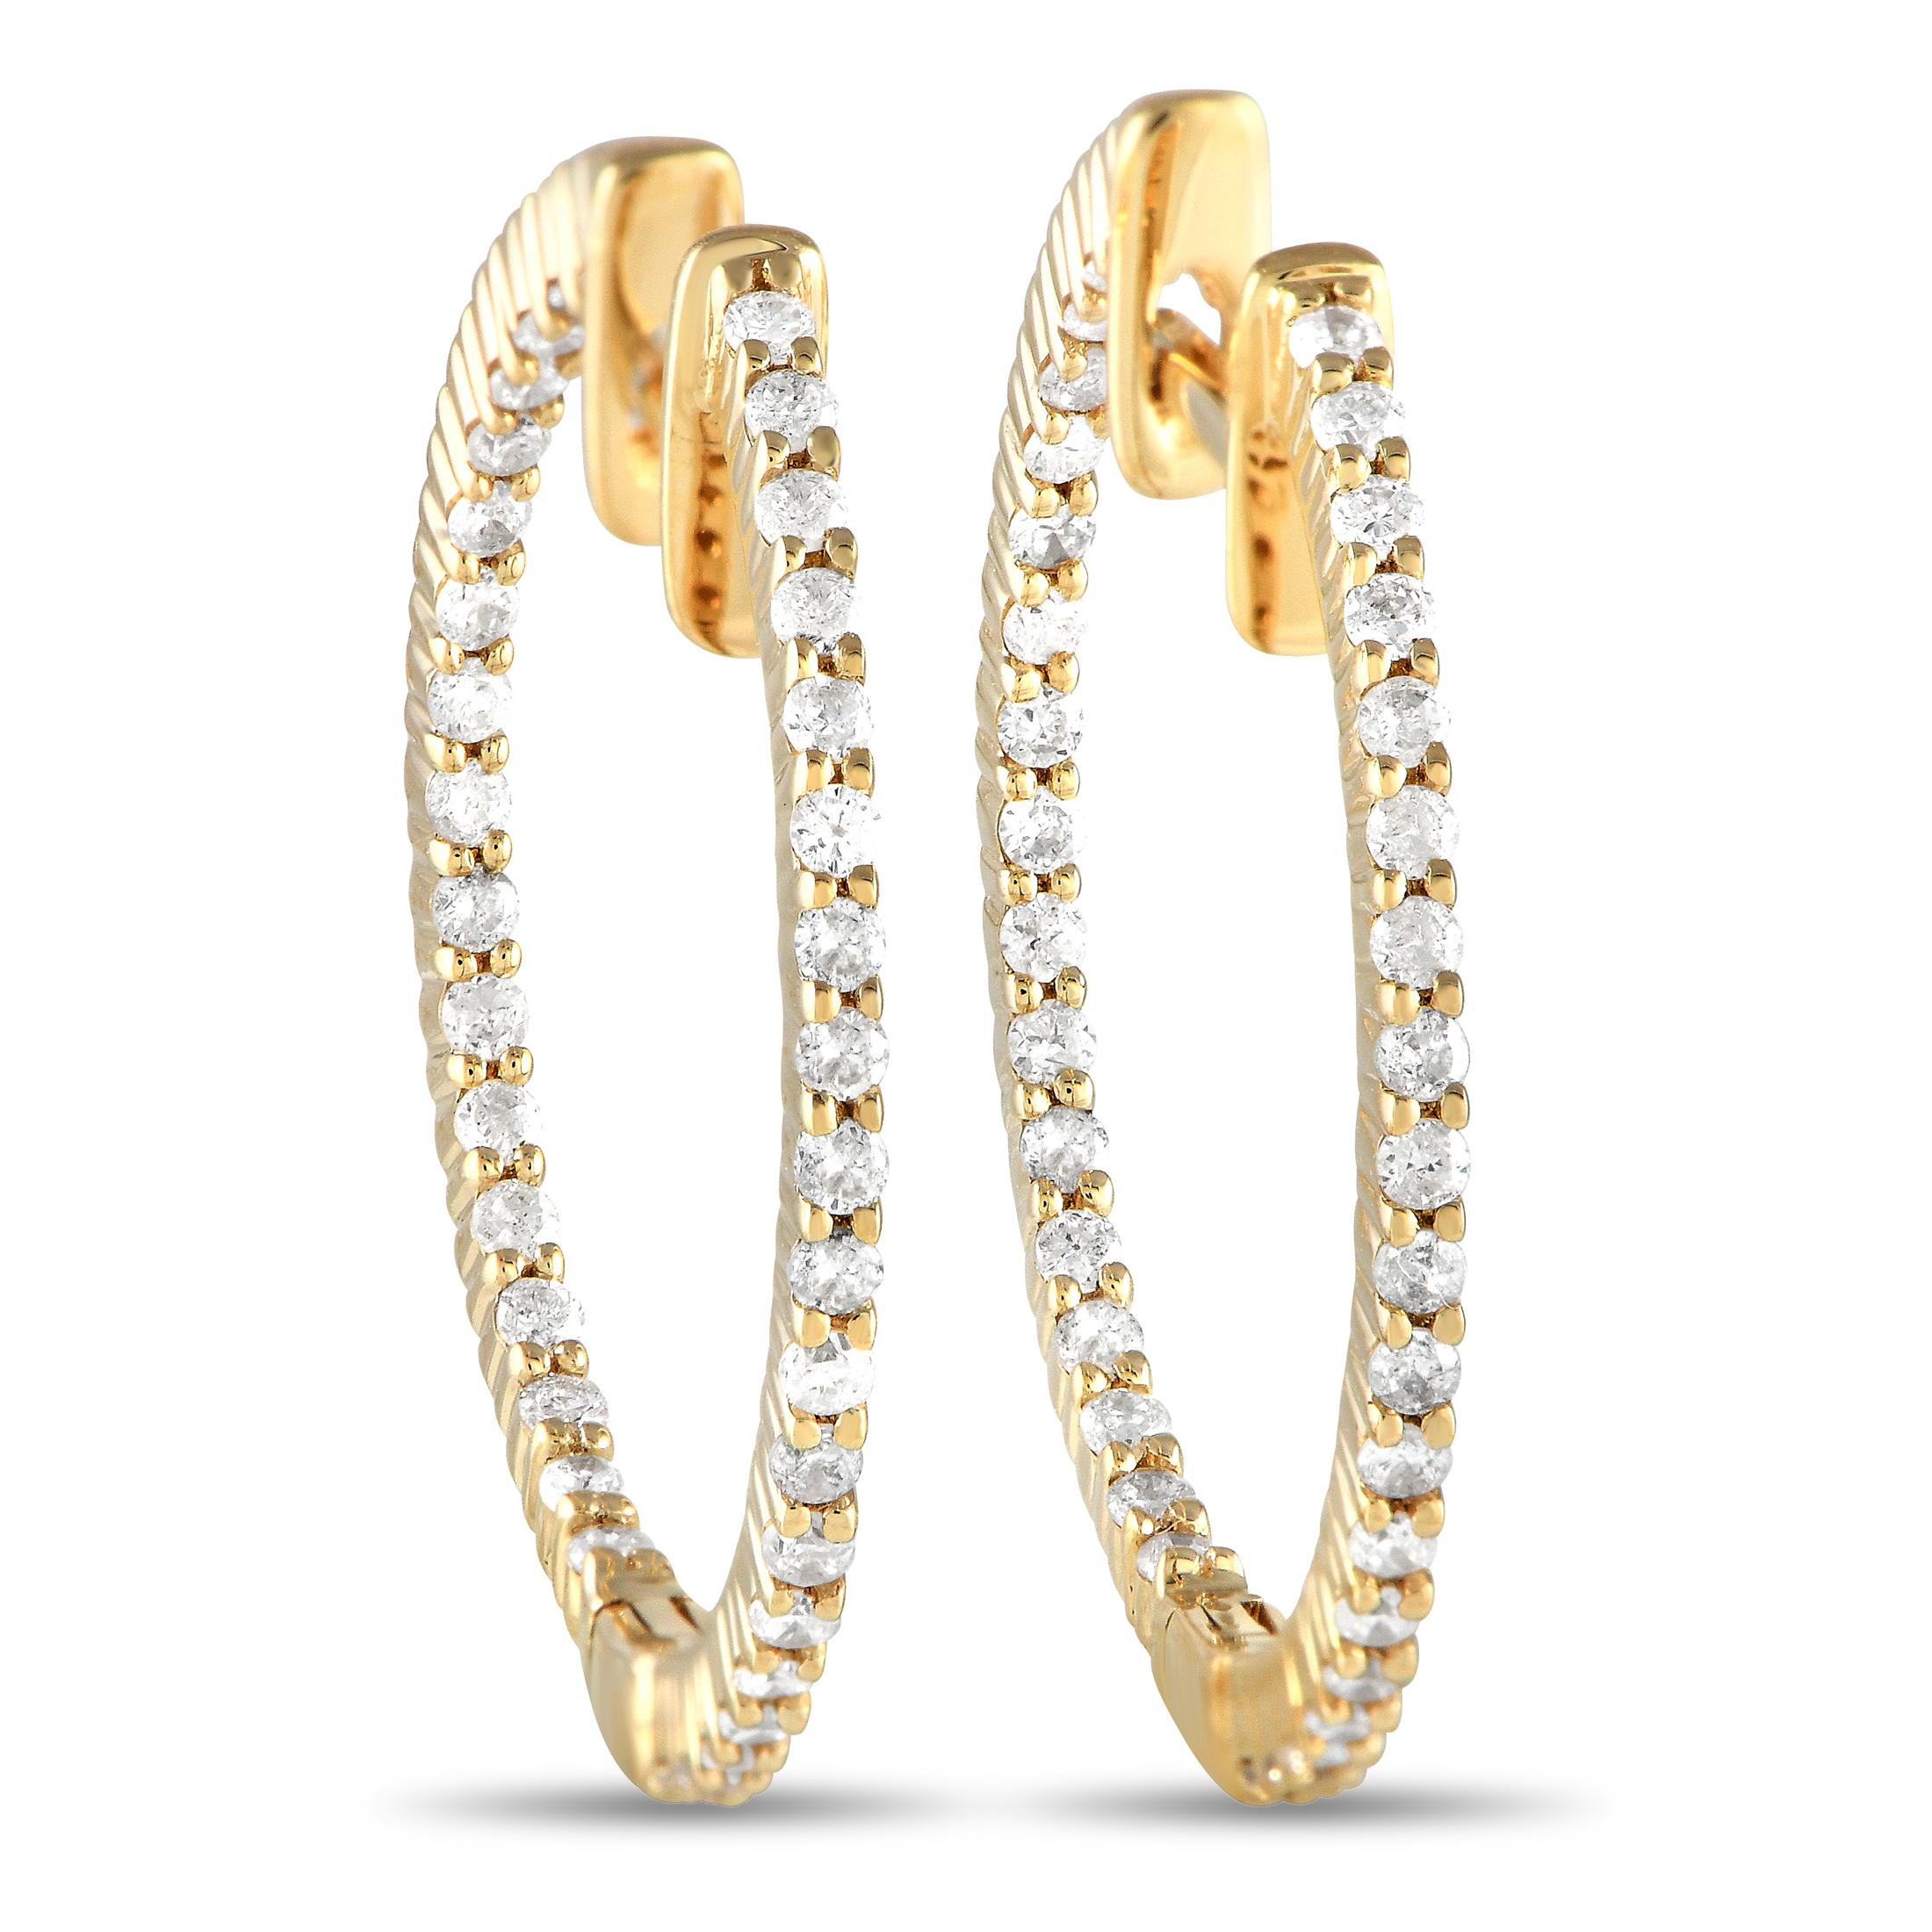 Lb Exclusive 14k Yellow Gold 0.55 Carat Diamond Inside-Out Hoop Earrings In New Condition For Sale In Southampton, PA